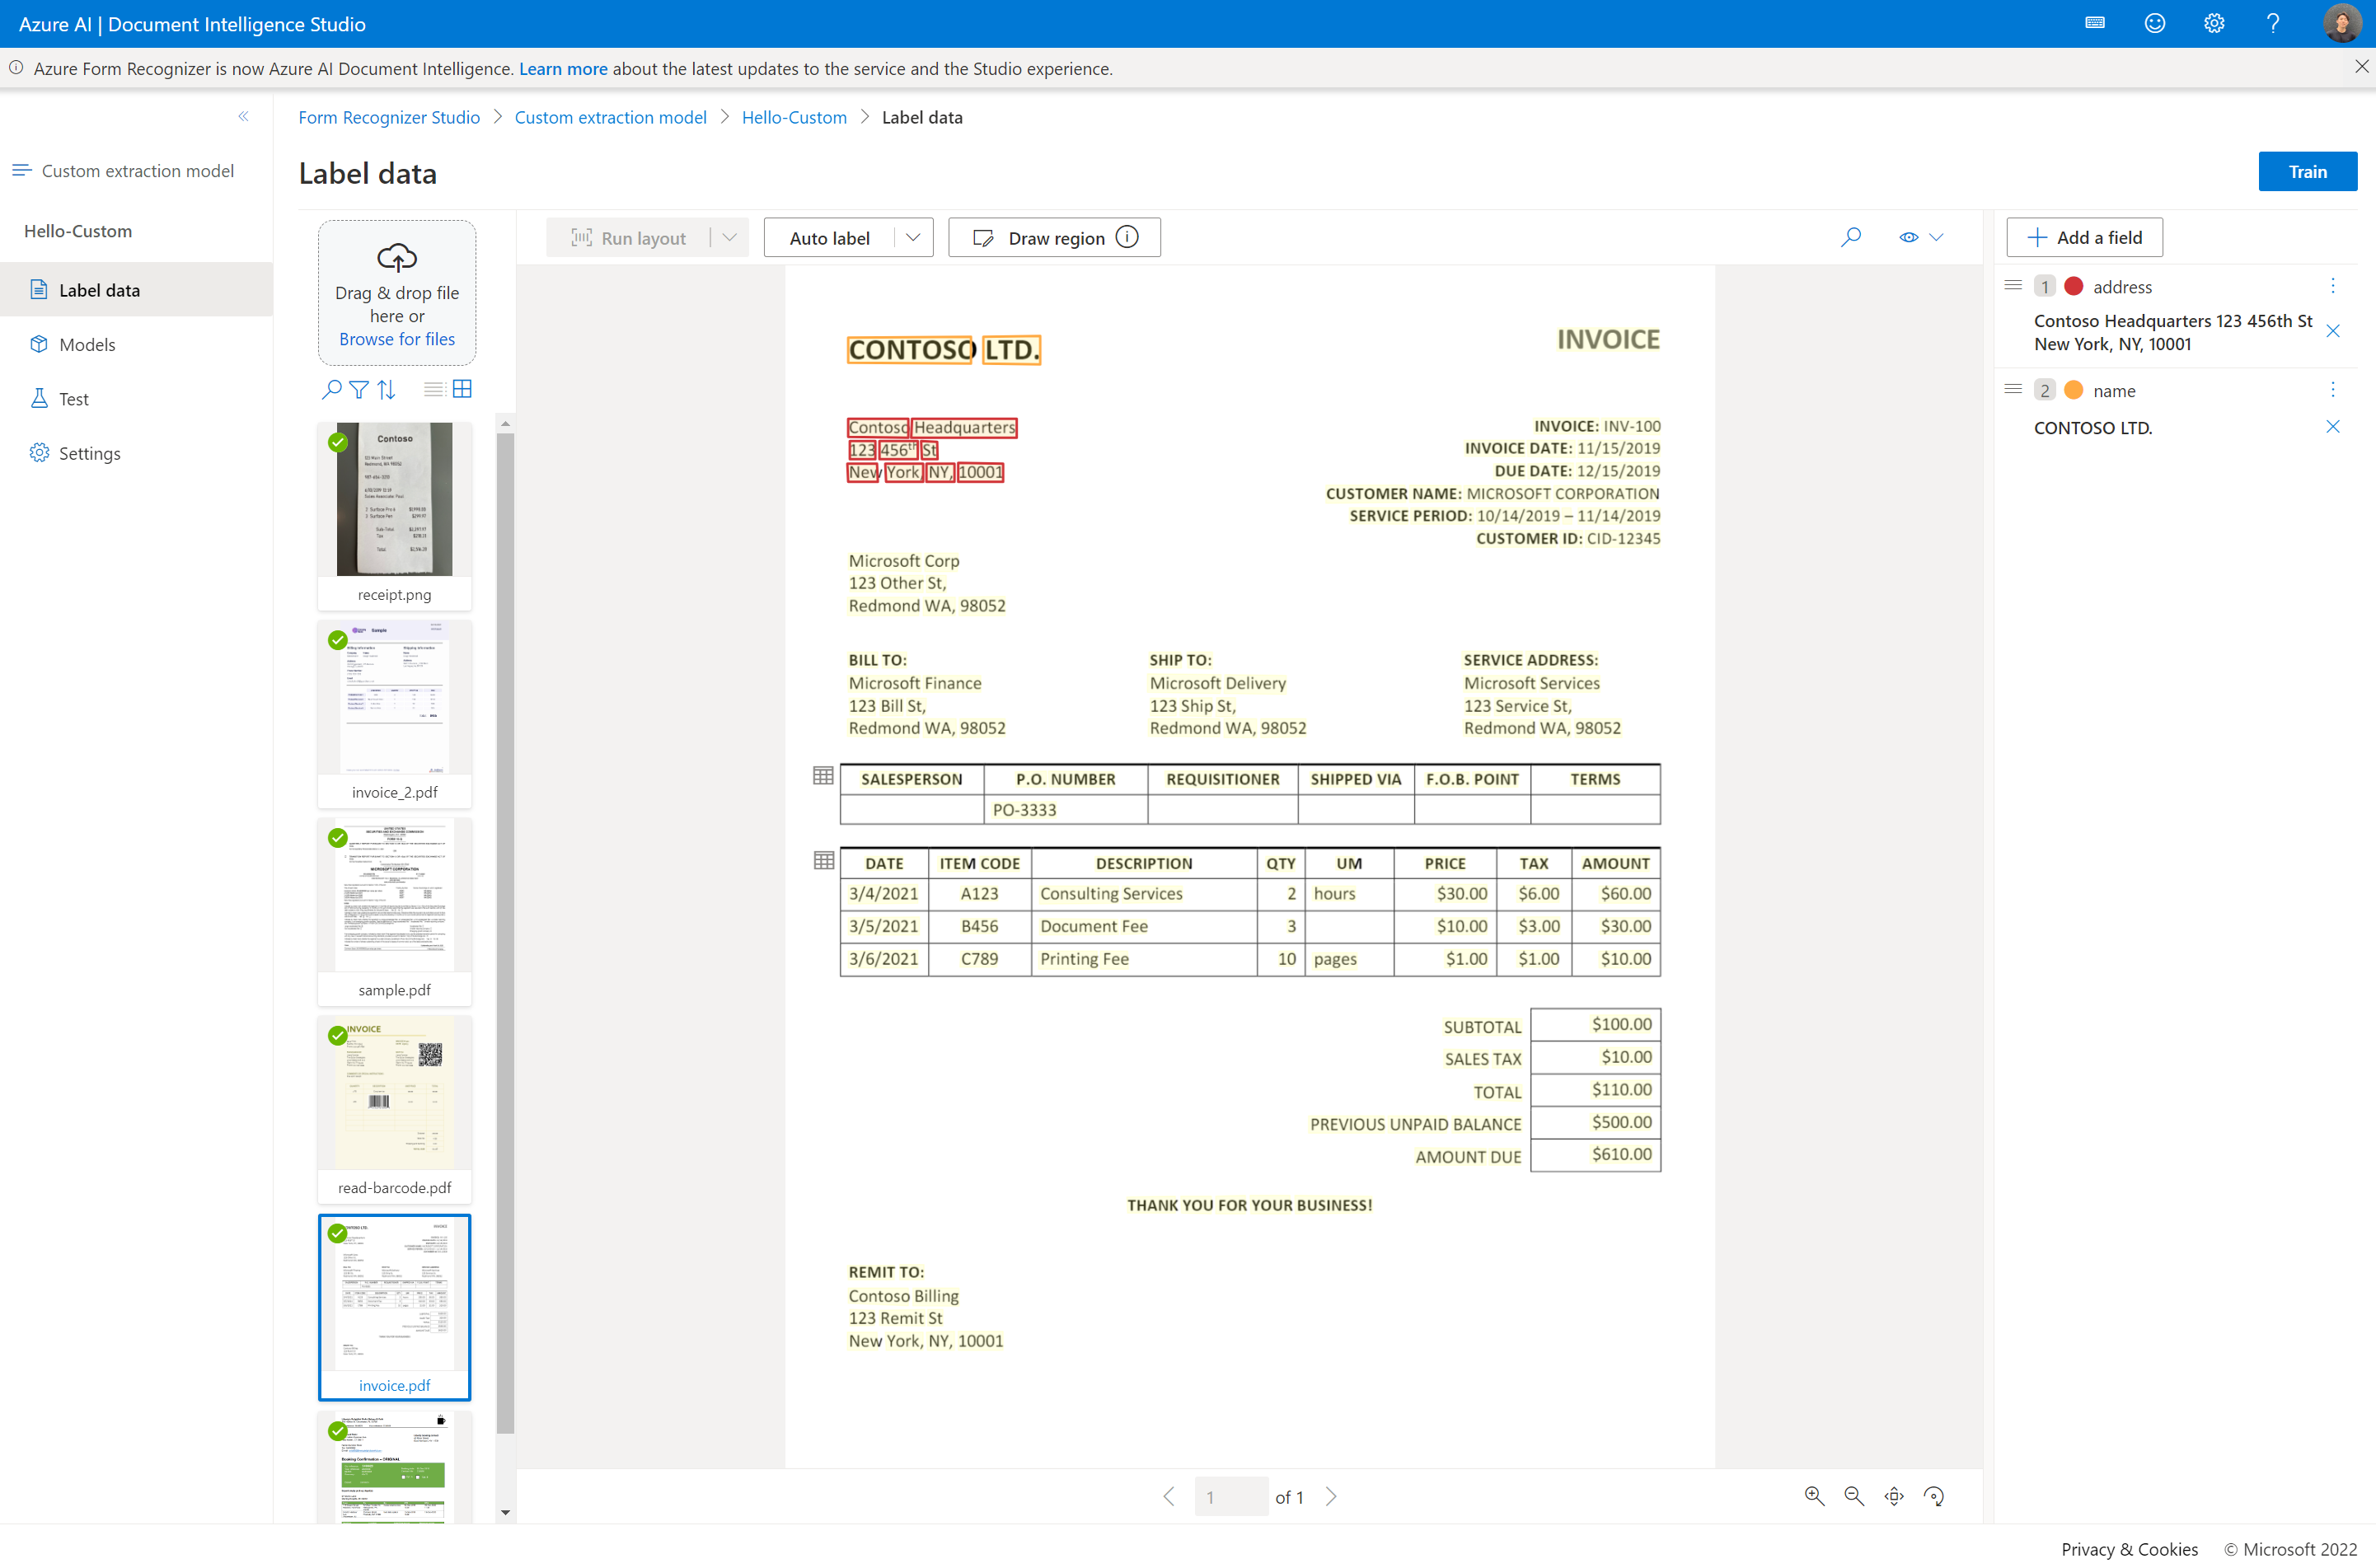 Screenshot showing document list view options and filters.